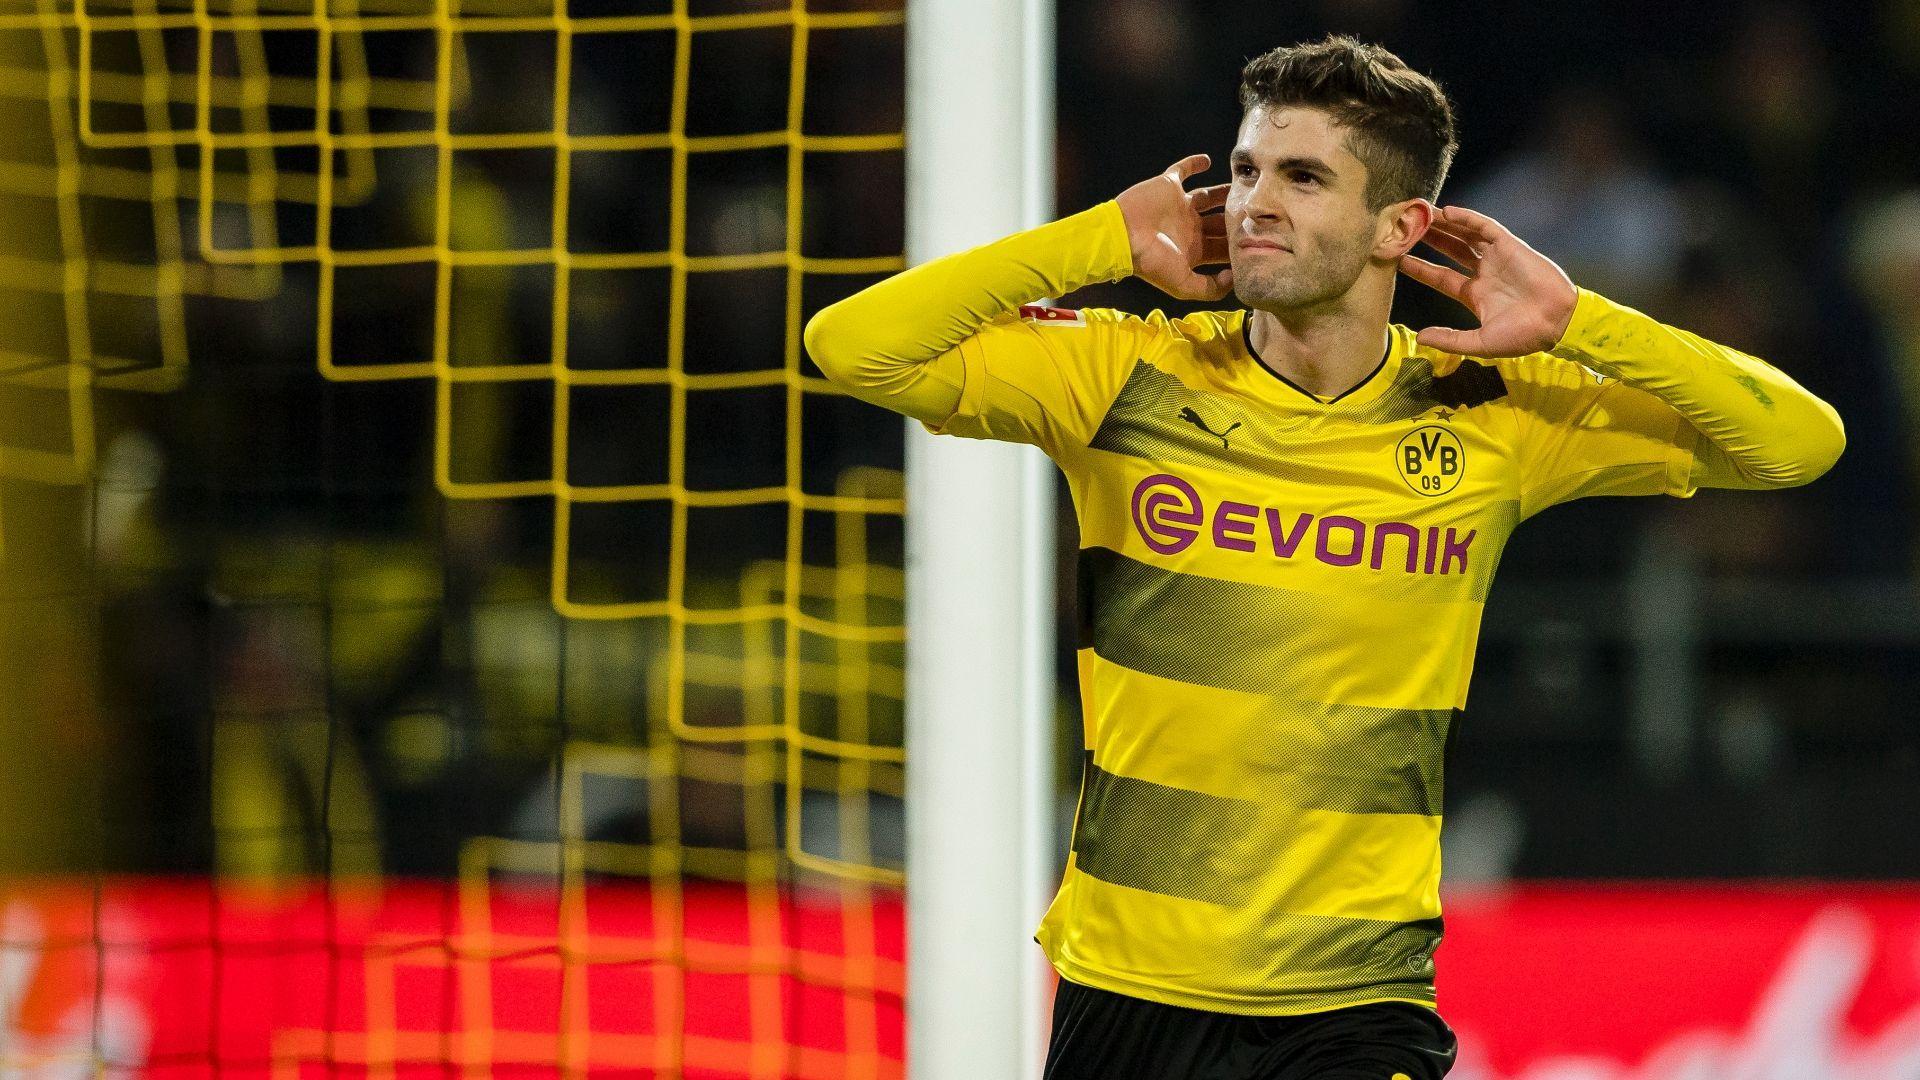 Christian Pulisic becoming quiet leader for U.S. and Dortmund. US